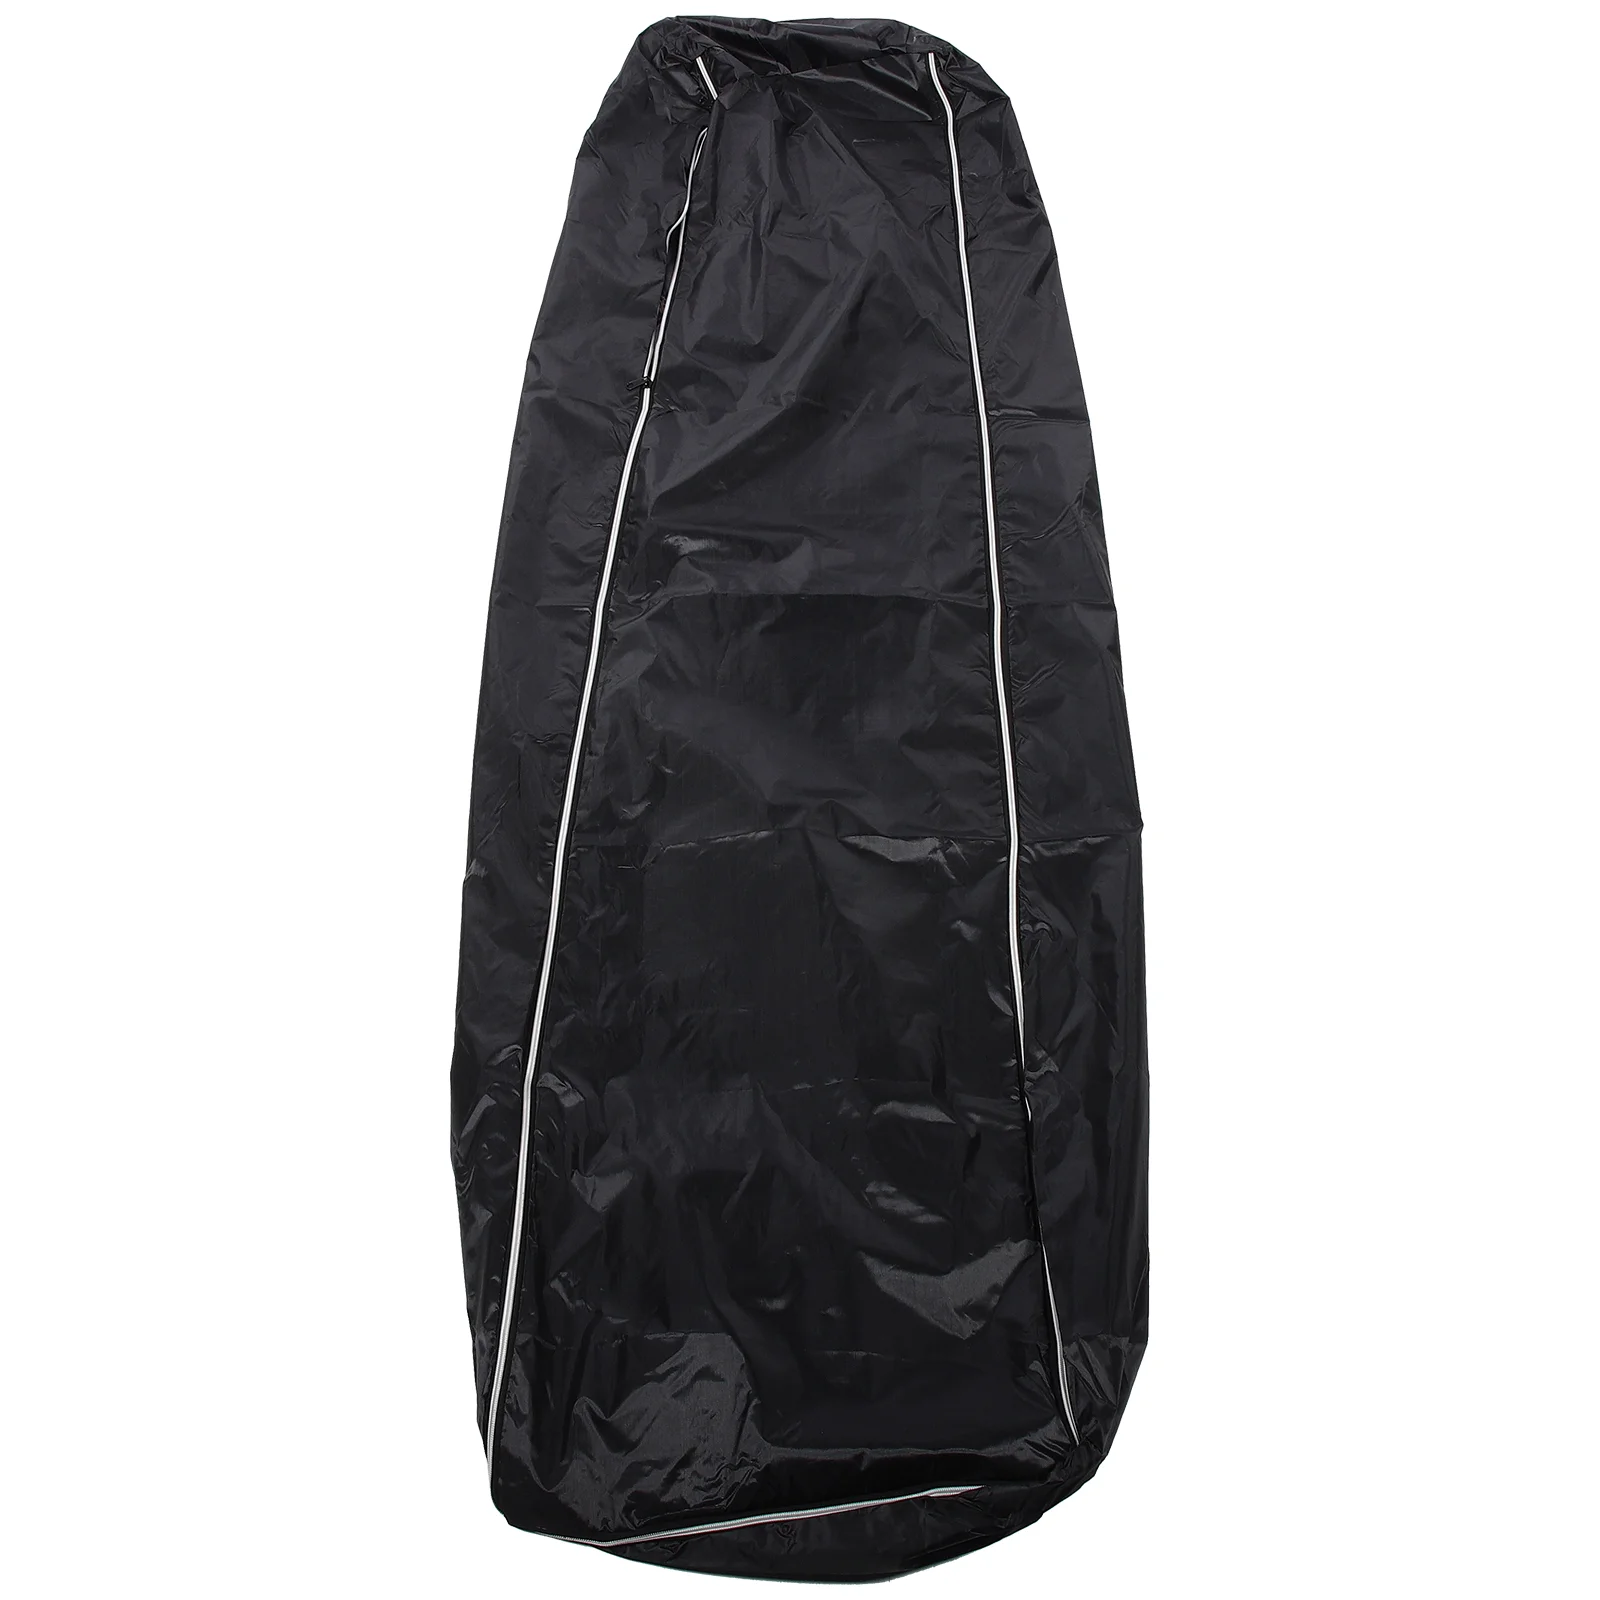 

Body Bag Cadaver Bags Funeral Portable for Dead Bodies Corpse Handling Carrying Treatment Container Large Capacity Decor